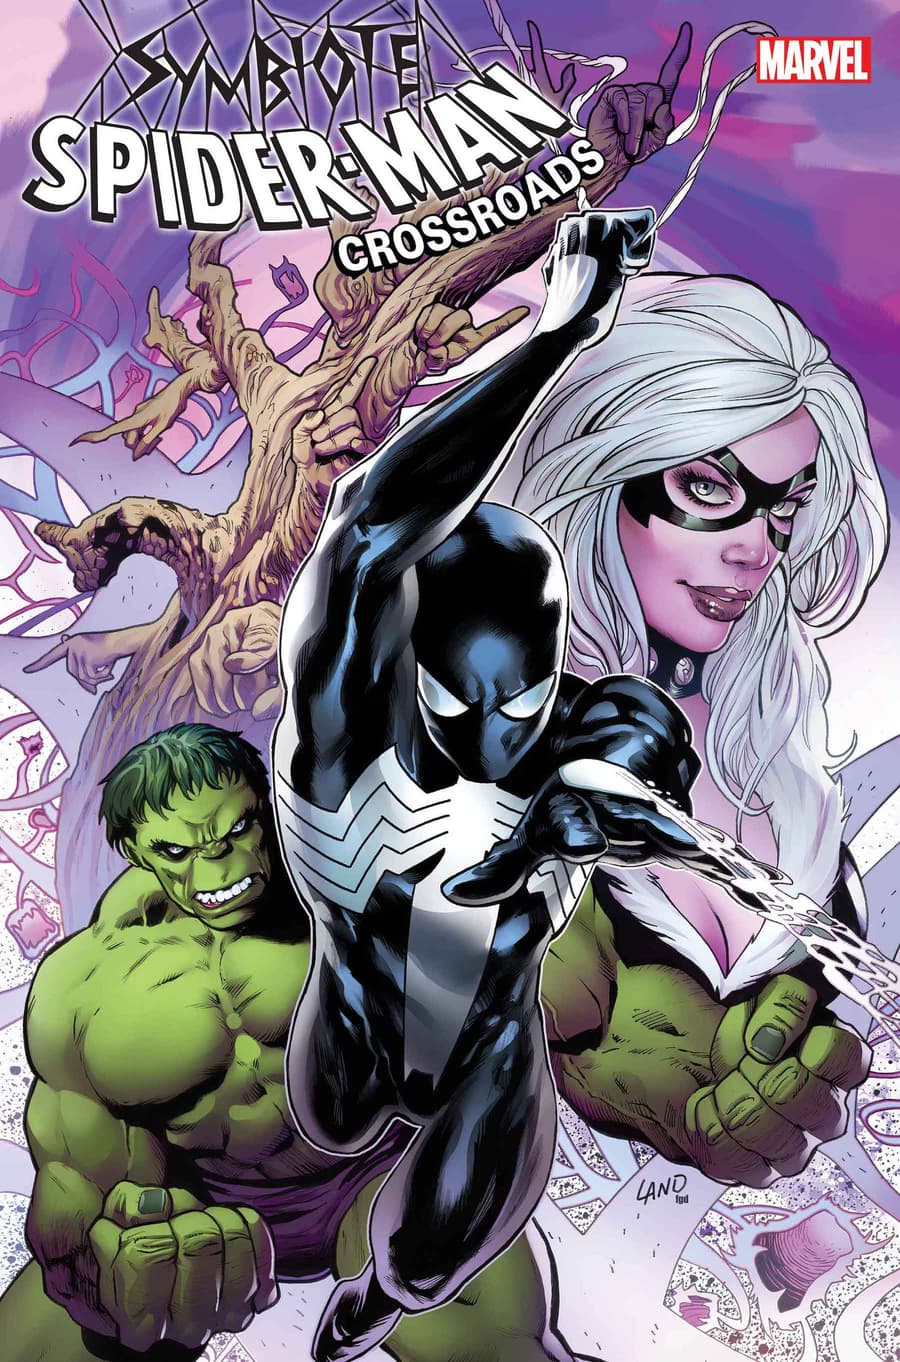 SYMBIOTE SPIDER-MAN: CROSSROADS #1 cover by Greg Land